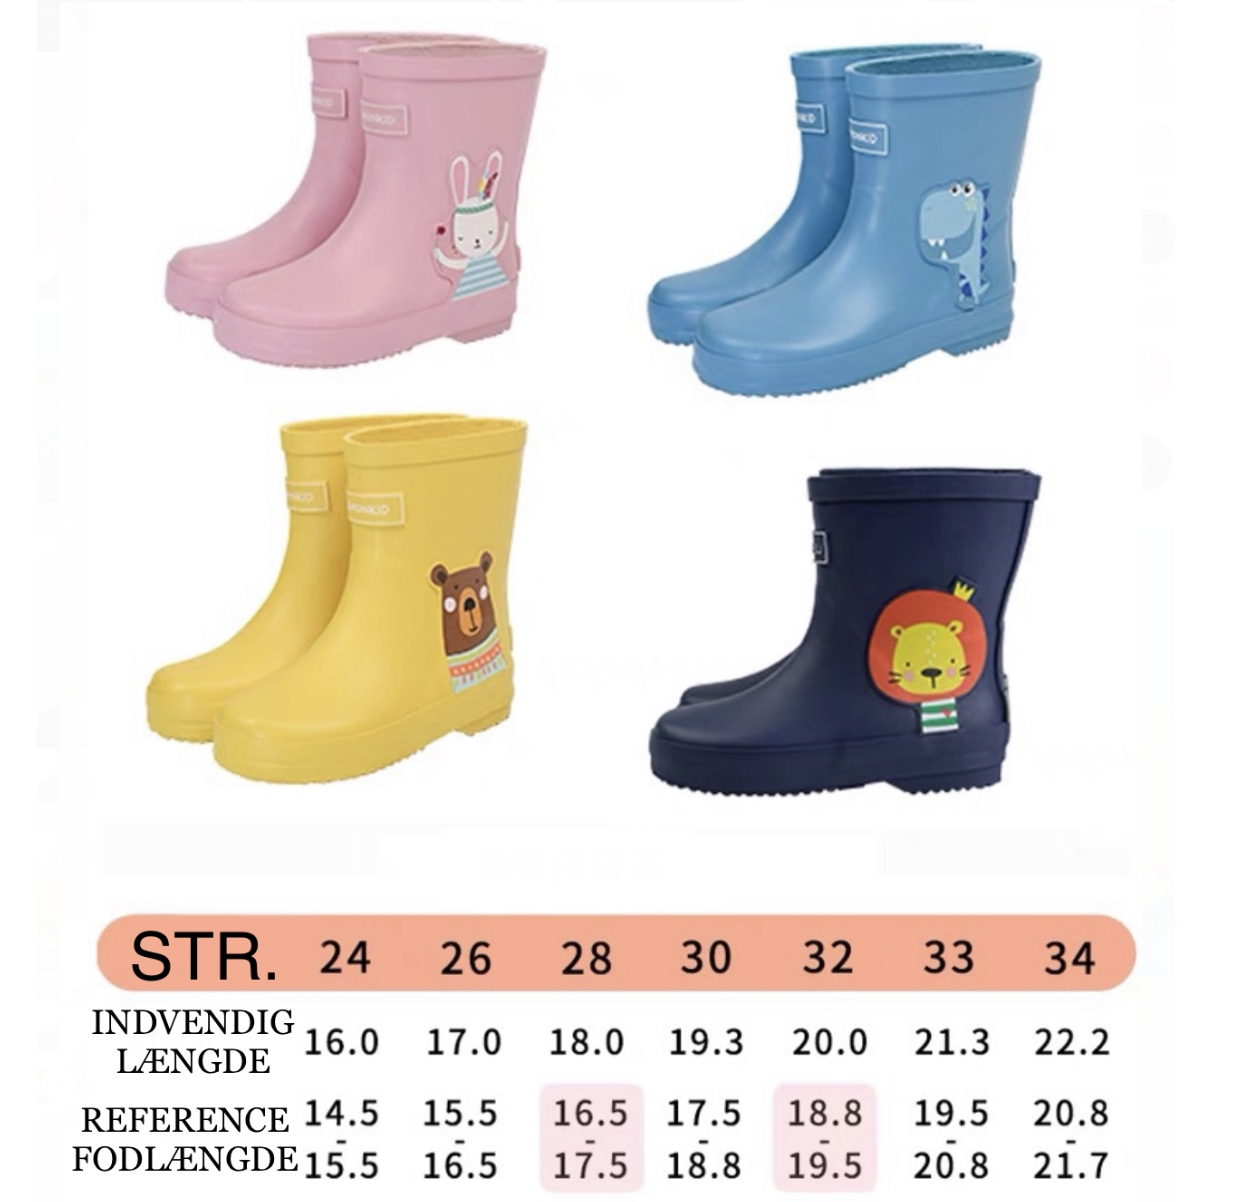 Rubber boots with bear